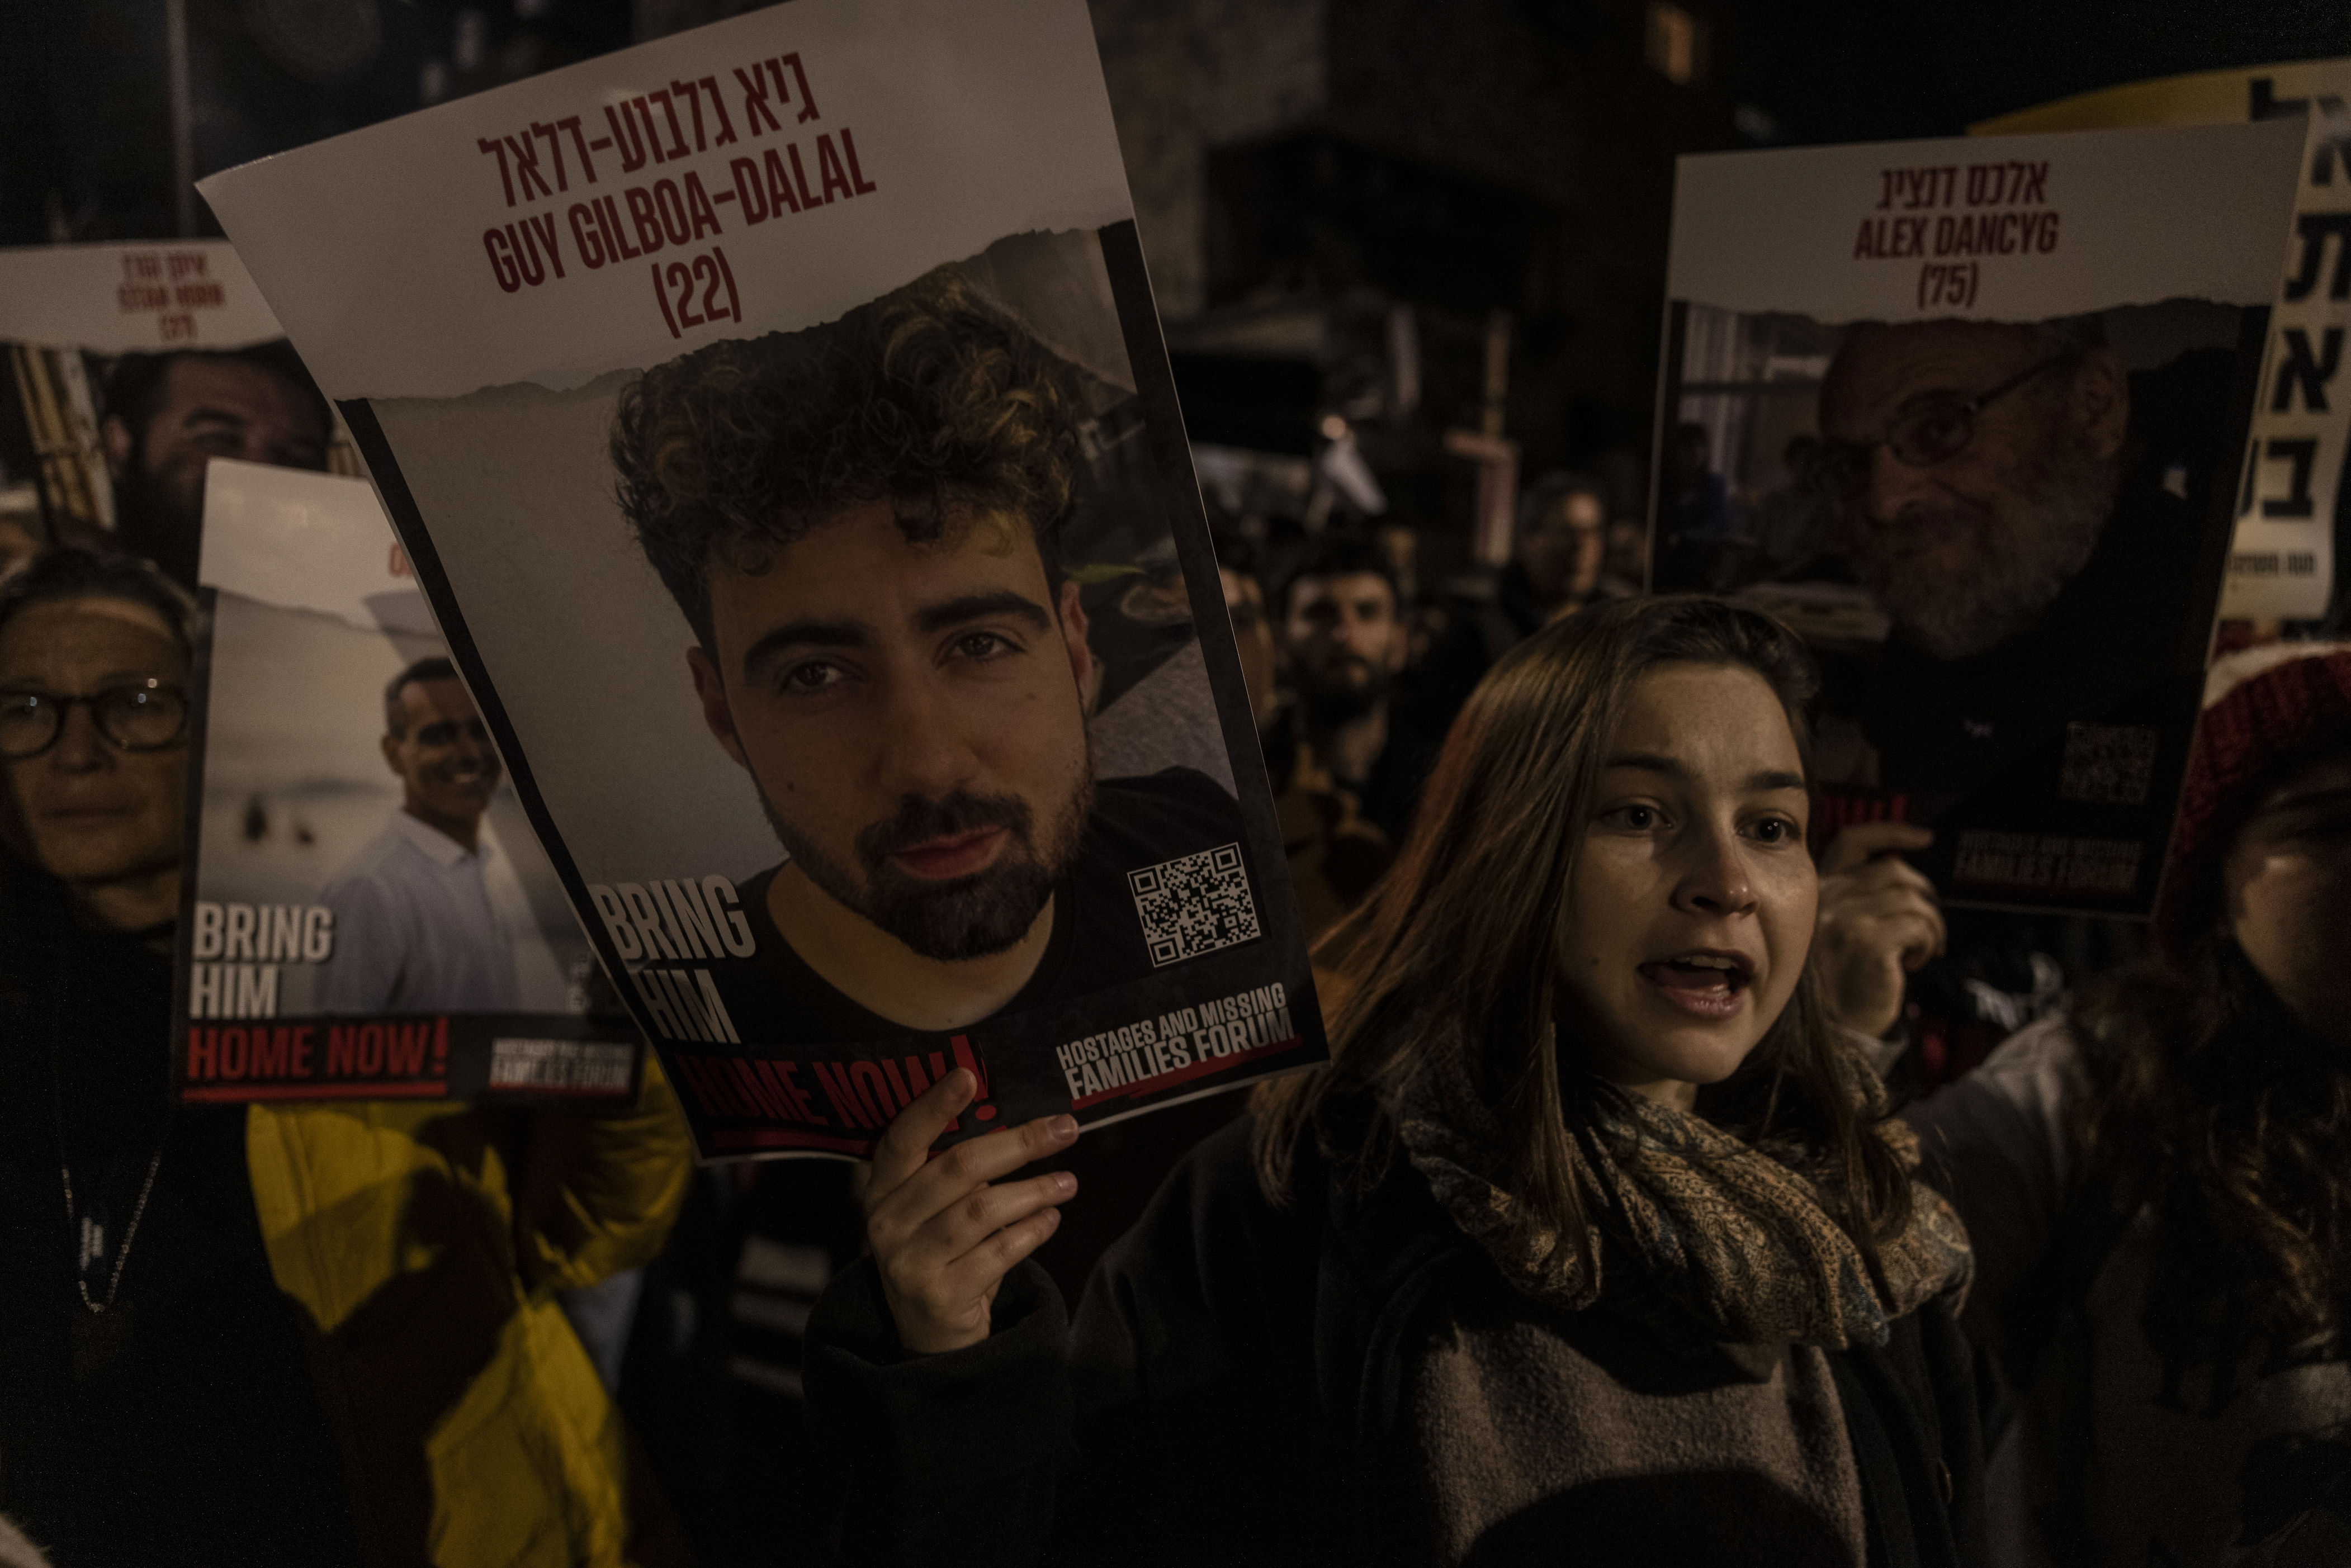 Israeli hostage families have ‘nothing left to lose’ in push for new deal